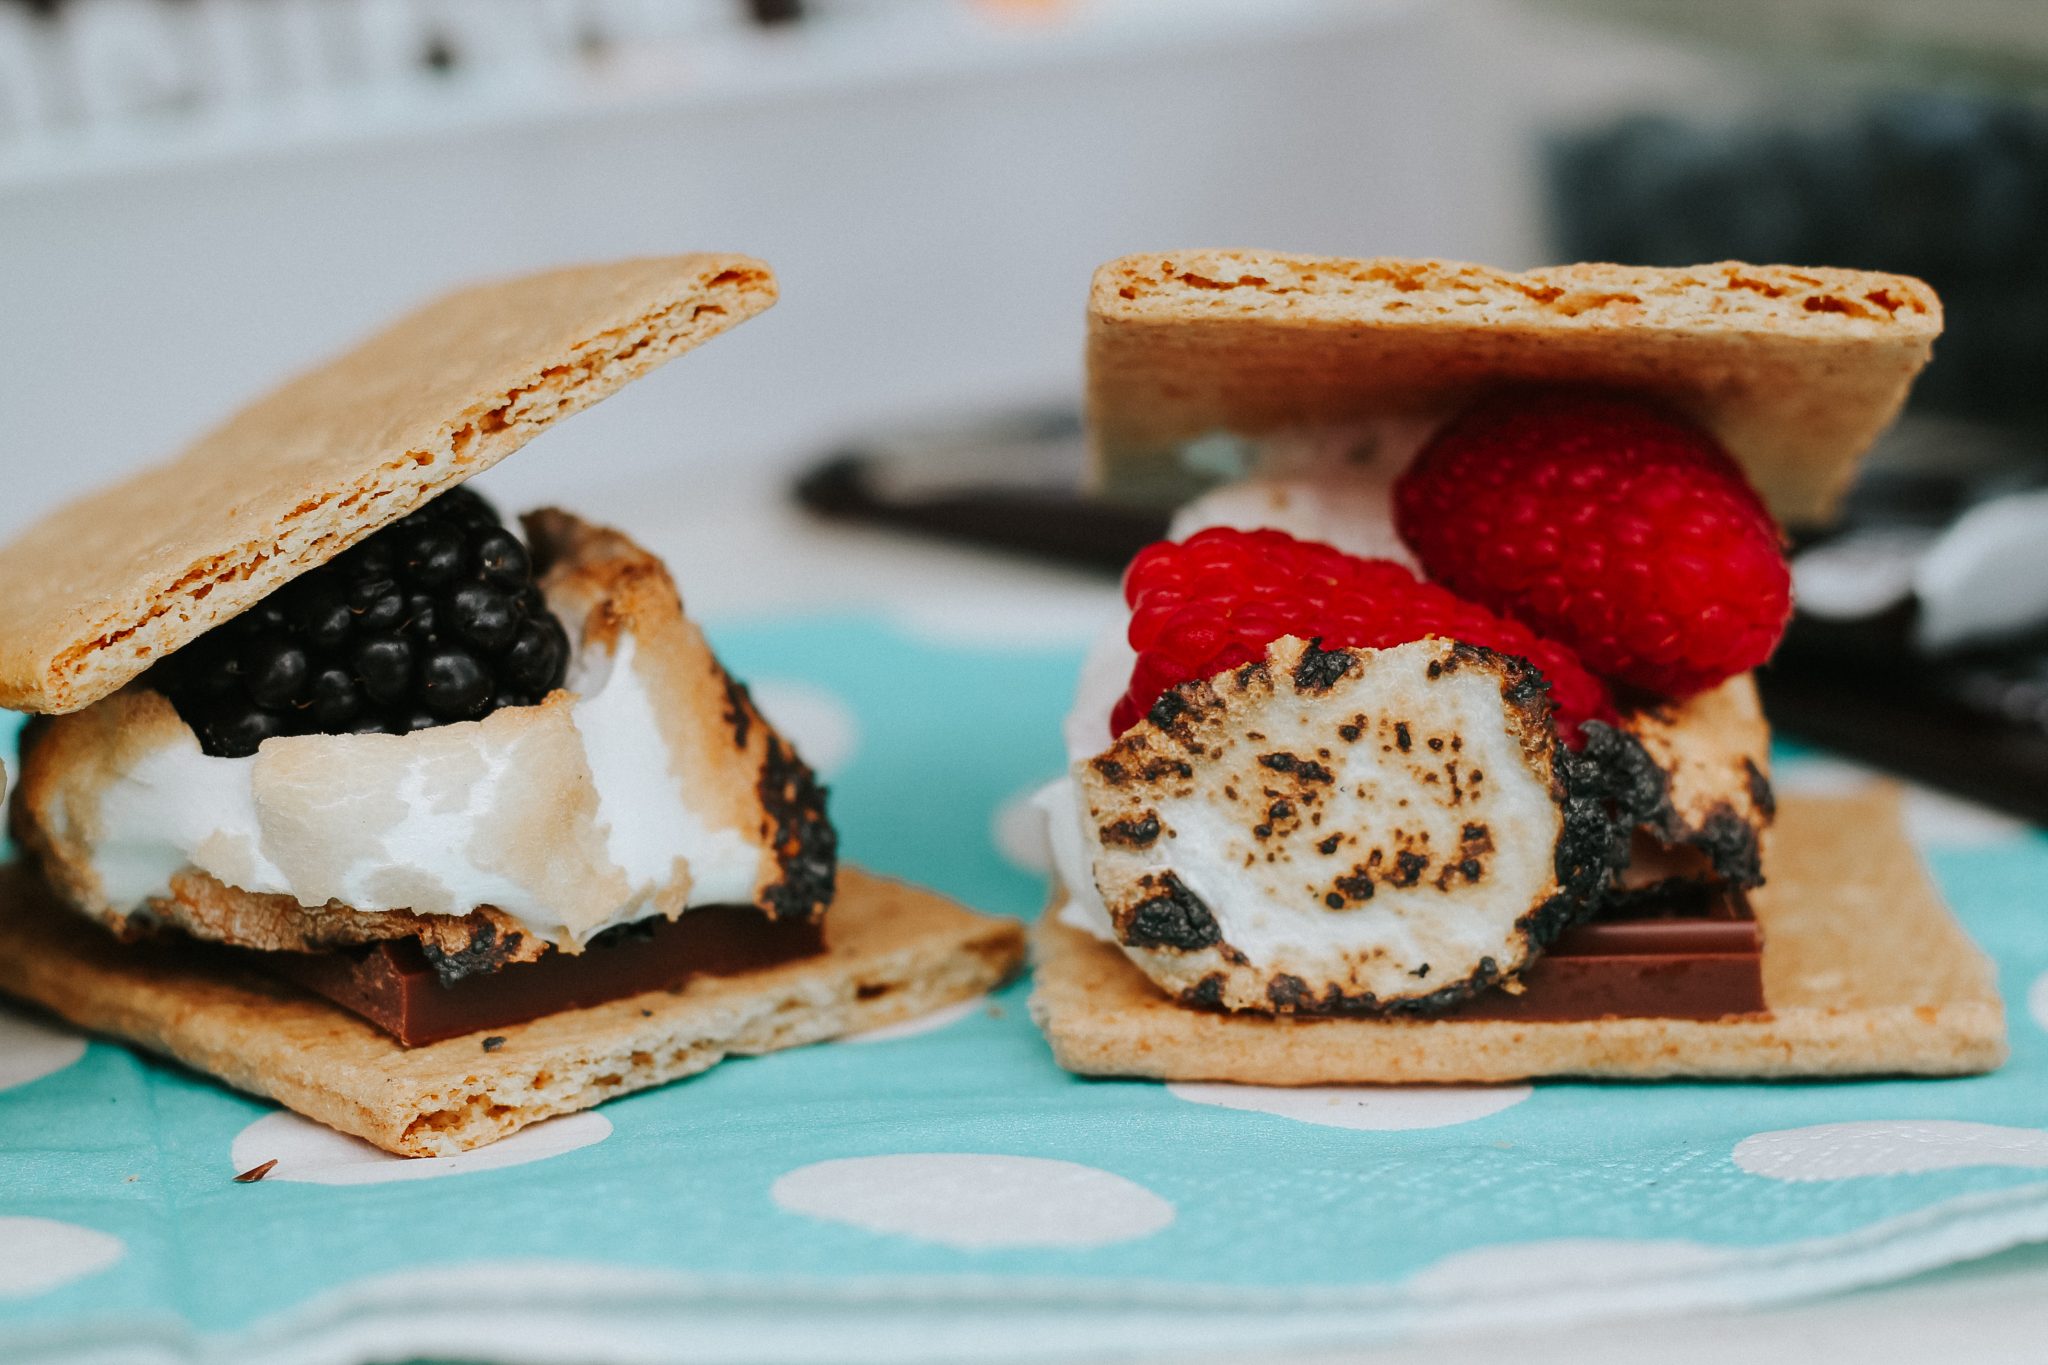 Creating an Easy Family S'mores Night